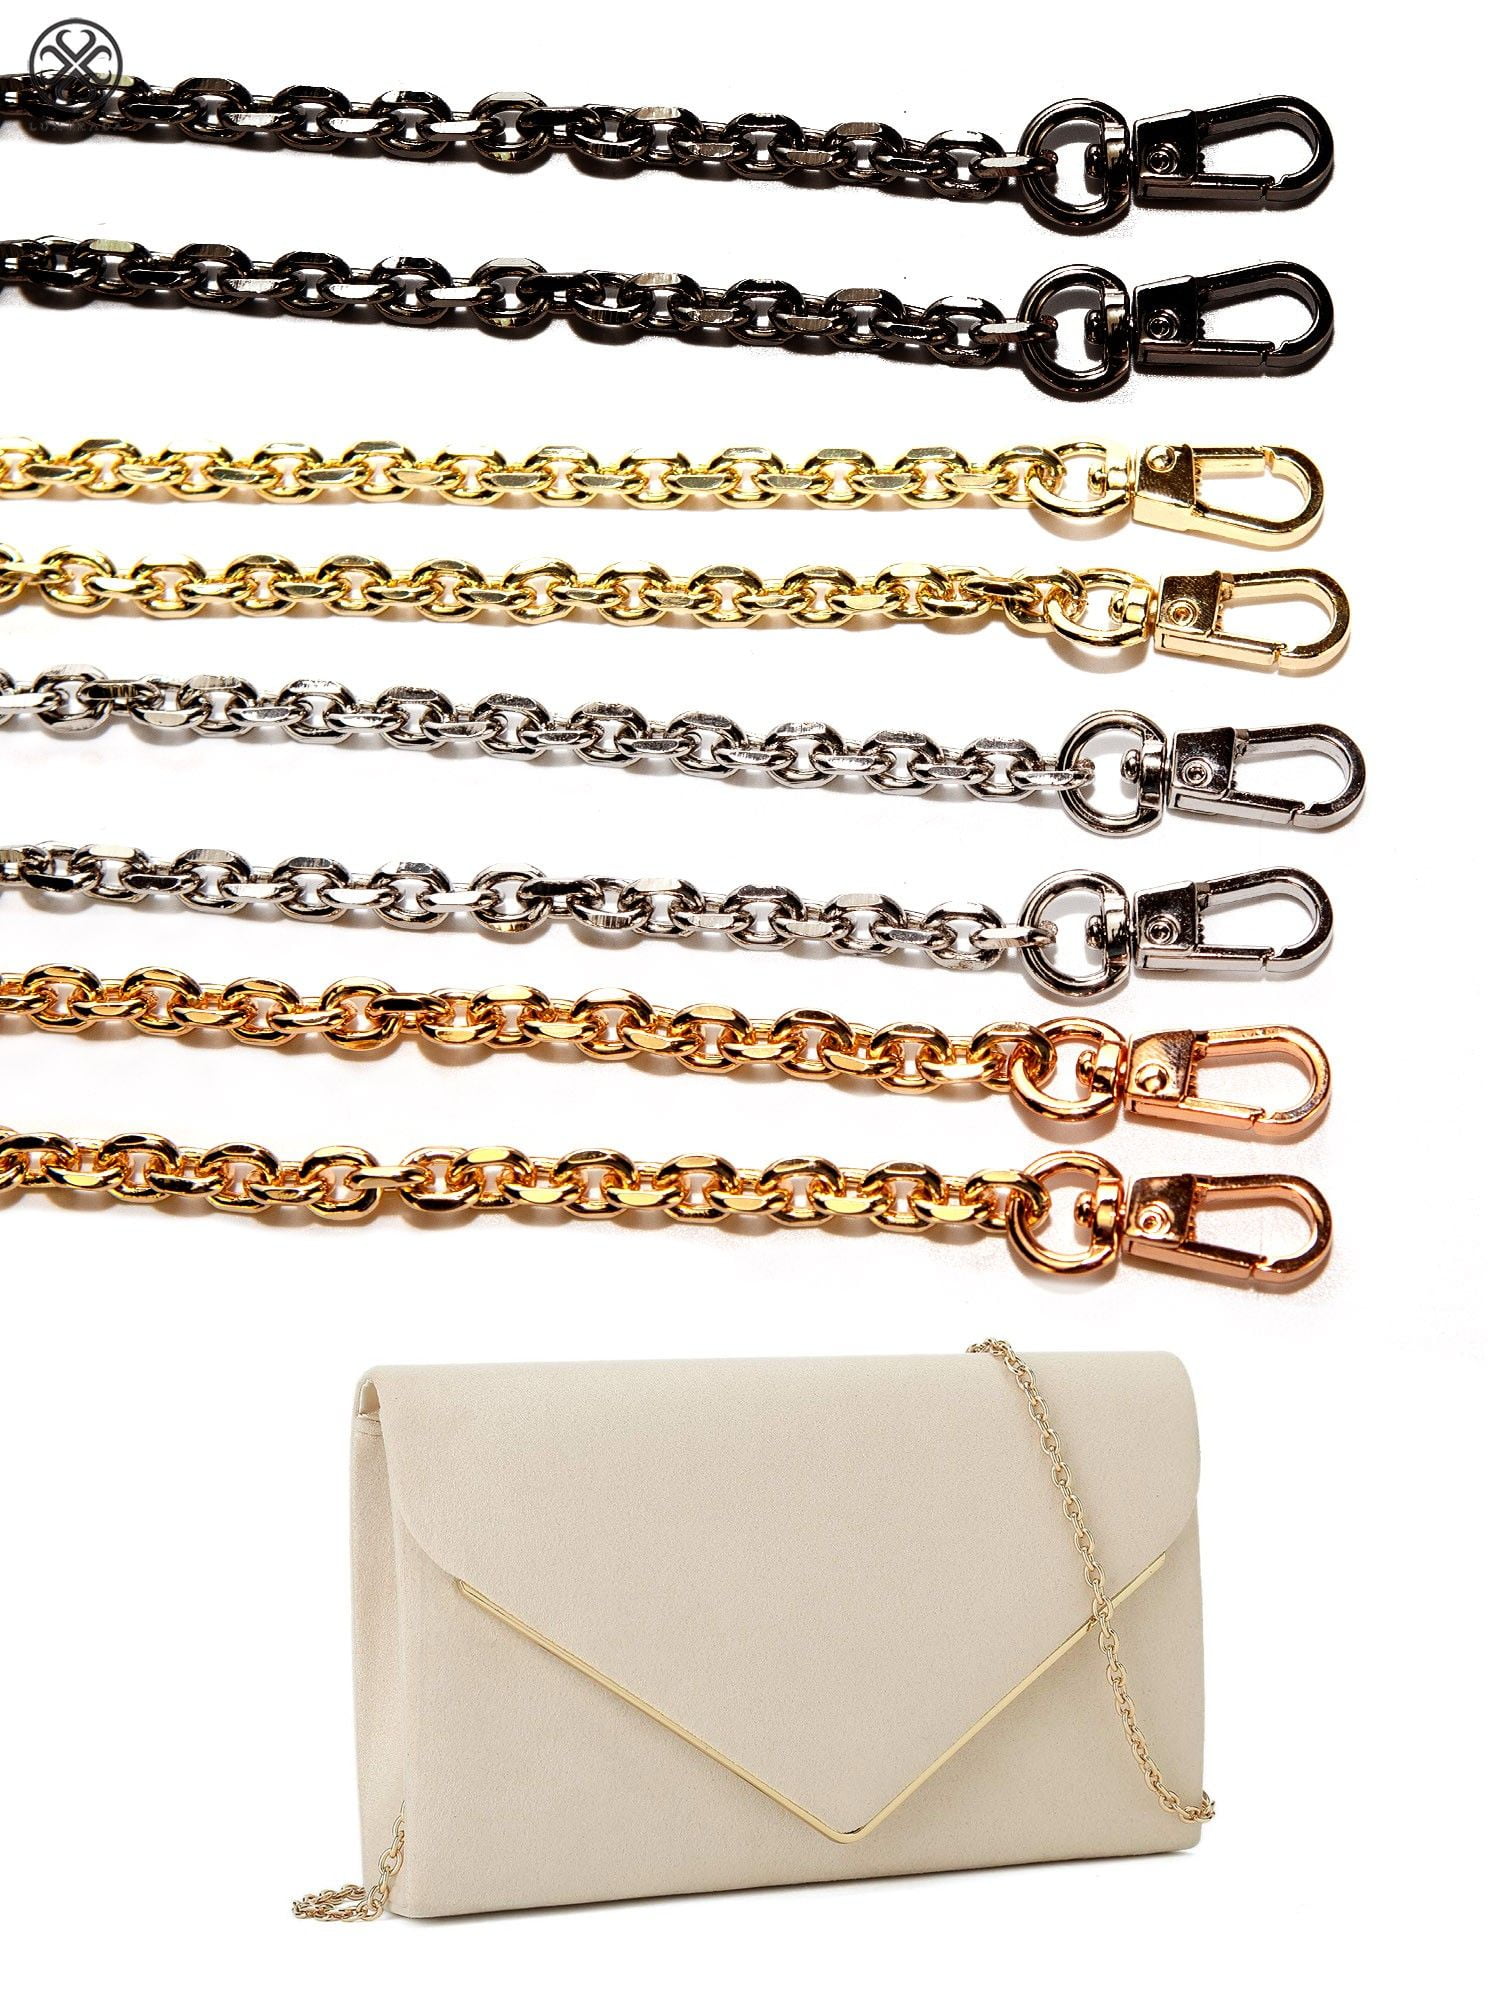 Luxtrada 47 Purse Chain Strap-Handbags Replacement Chains Metal Chain  Strap for Wallet Bag Crossbody Shoulder Chain Champagne Gold